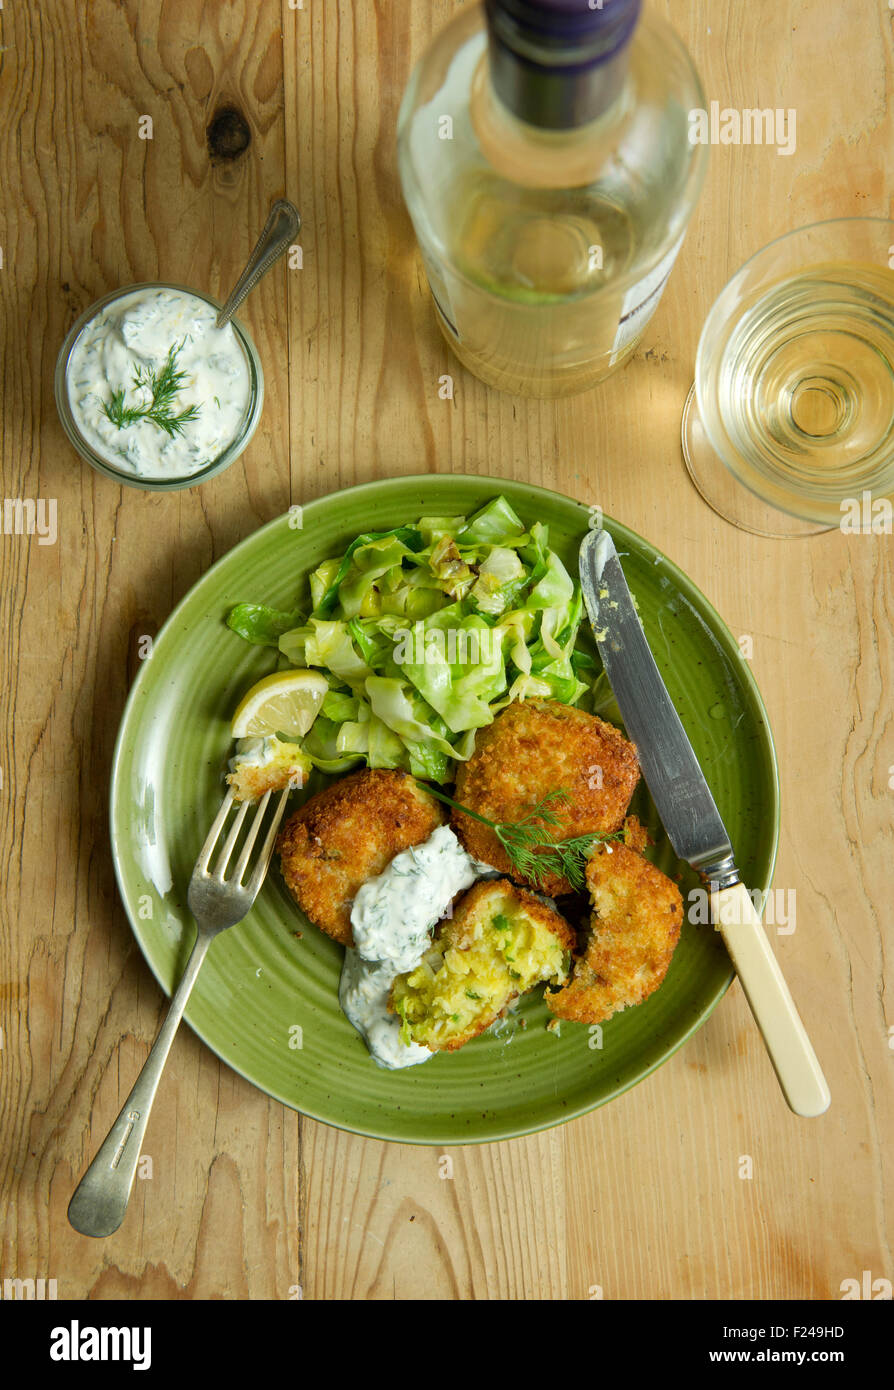 Spiced fishcakes with spring cabbage and tartare sauce. a UK meal cuisine seafood fish meal meals dish small plate eat eating Stock Photo